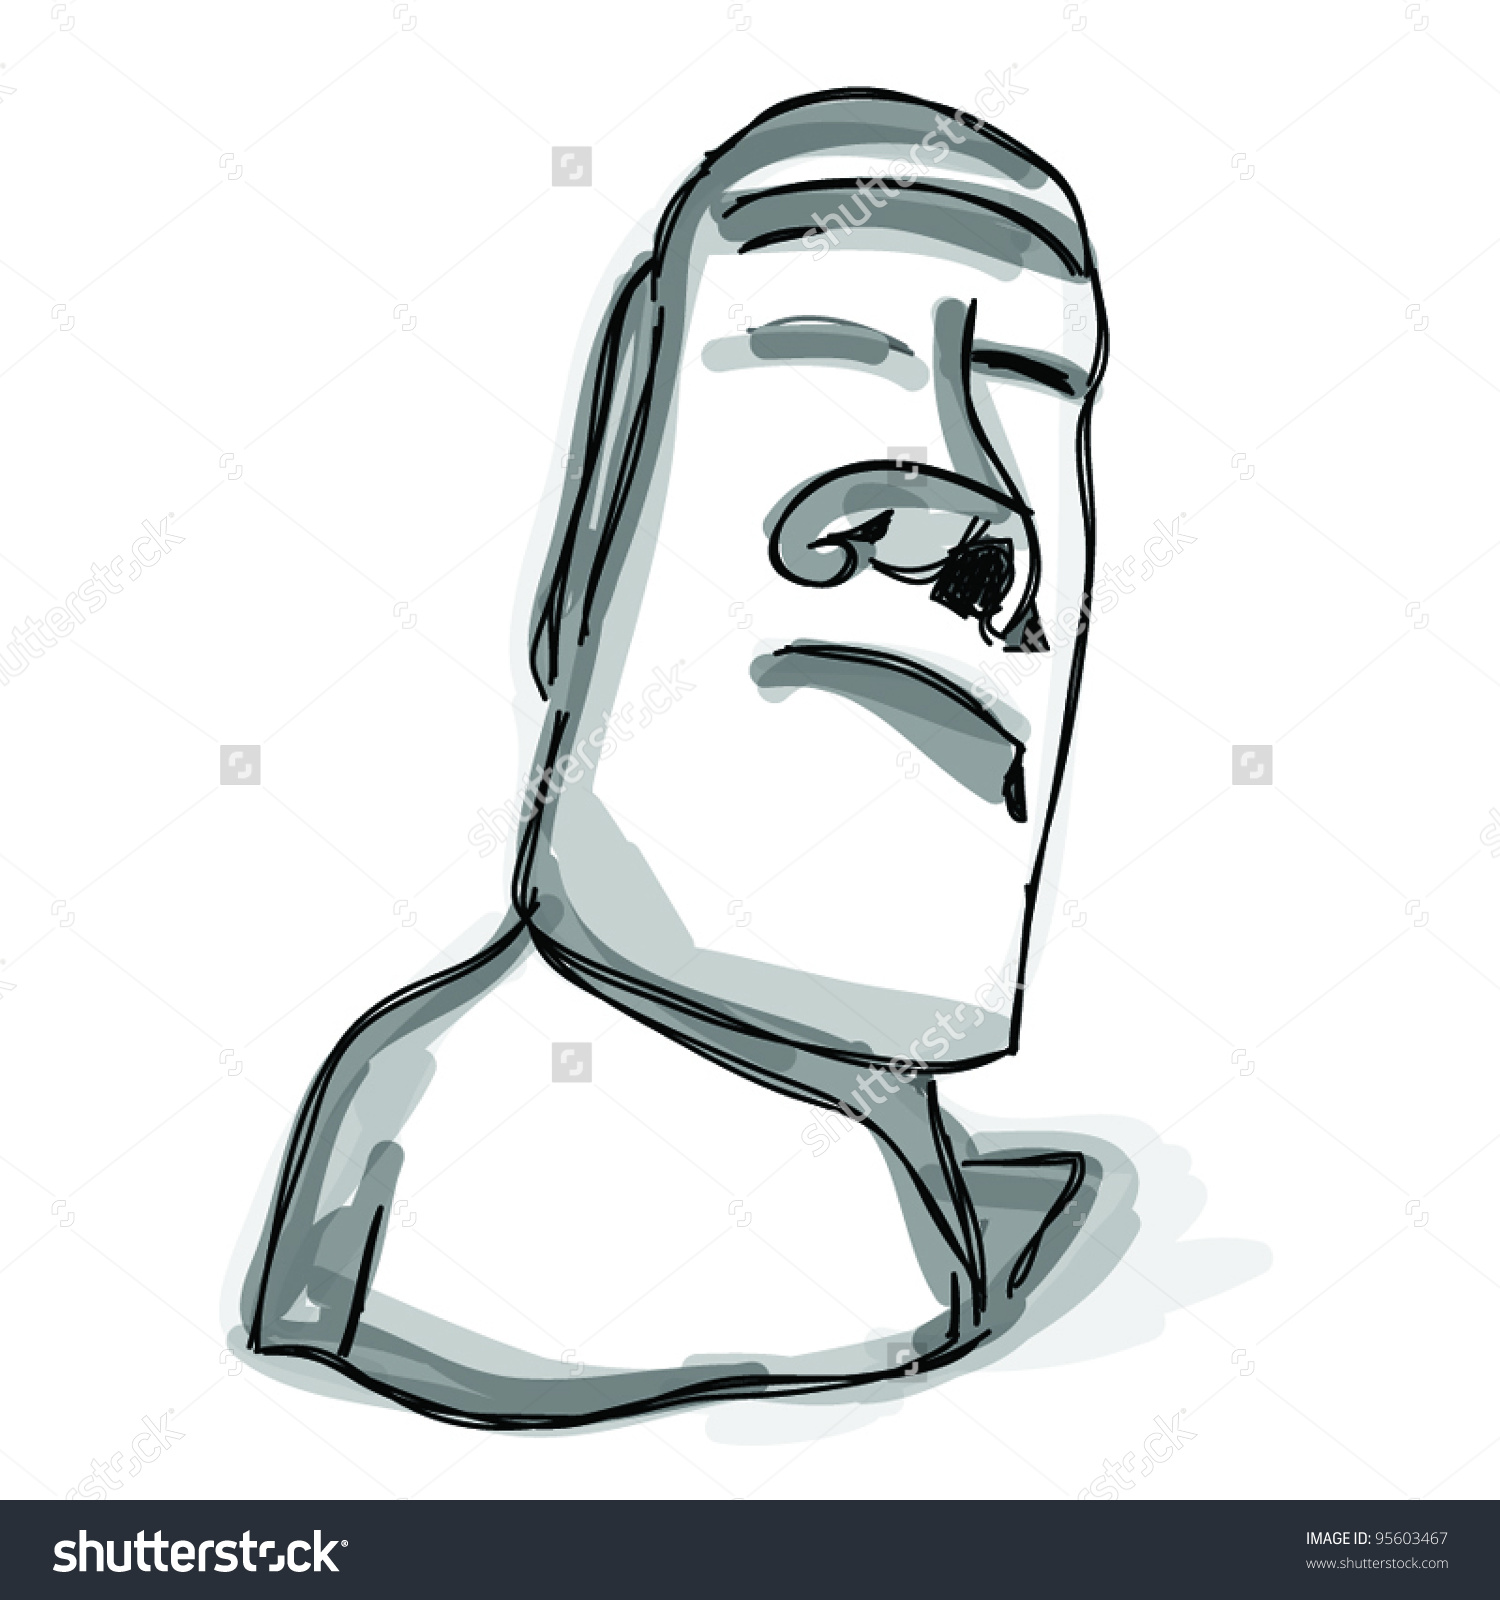 Easter Island clipart #1, Download drawings